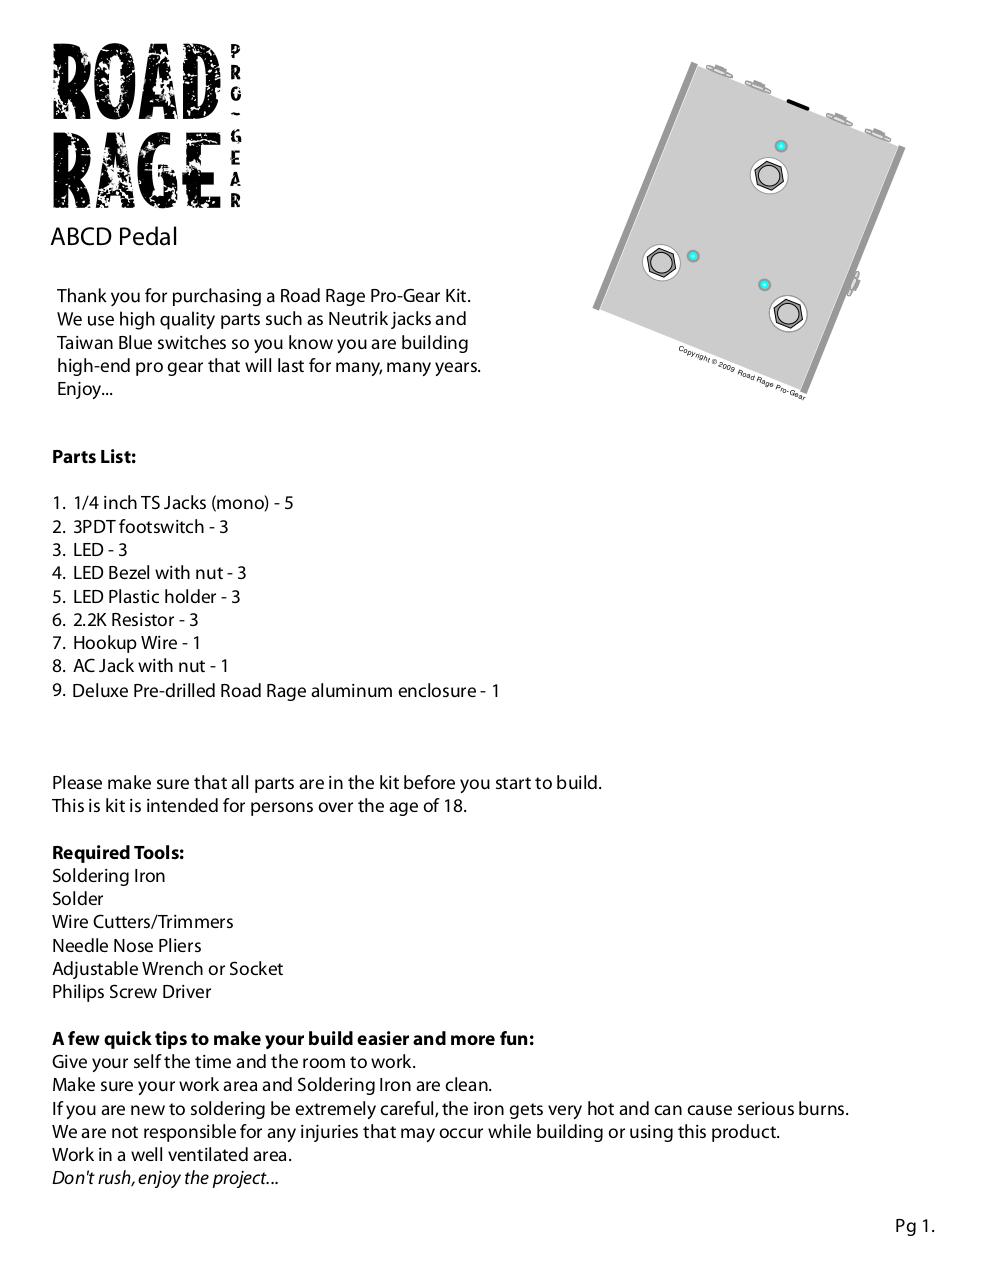 Preview of PDF document rrpg-abcd-pedal-3.pdf